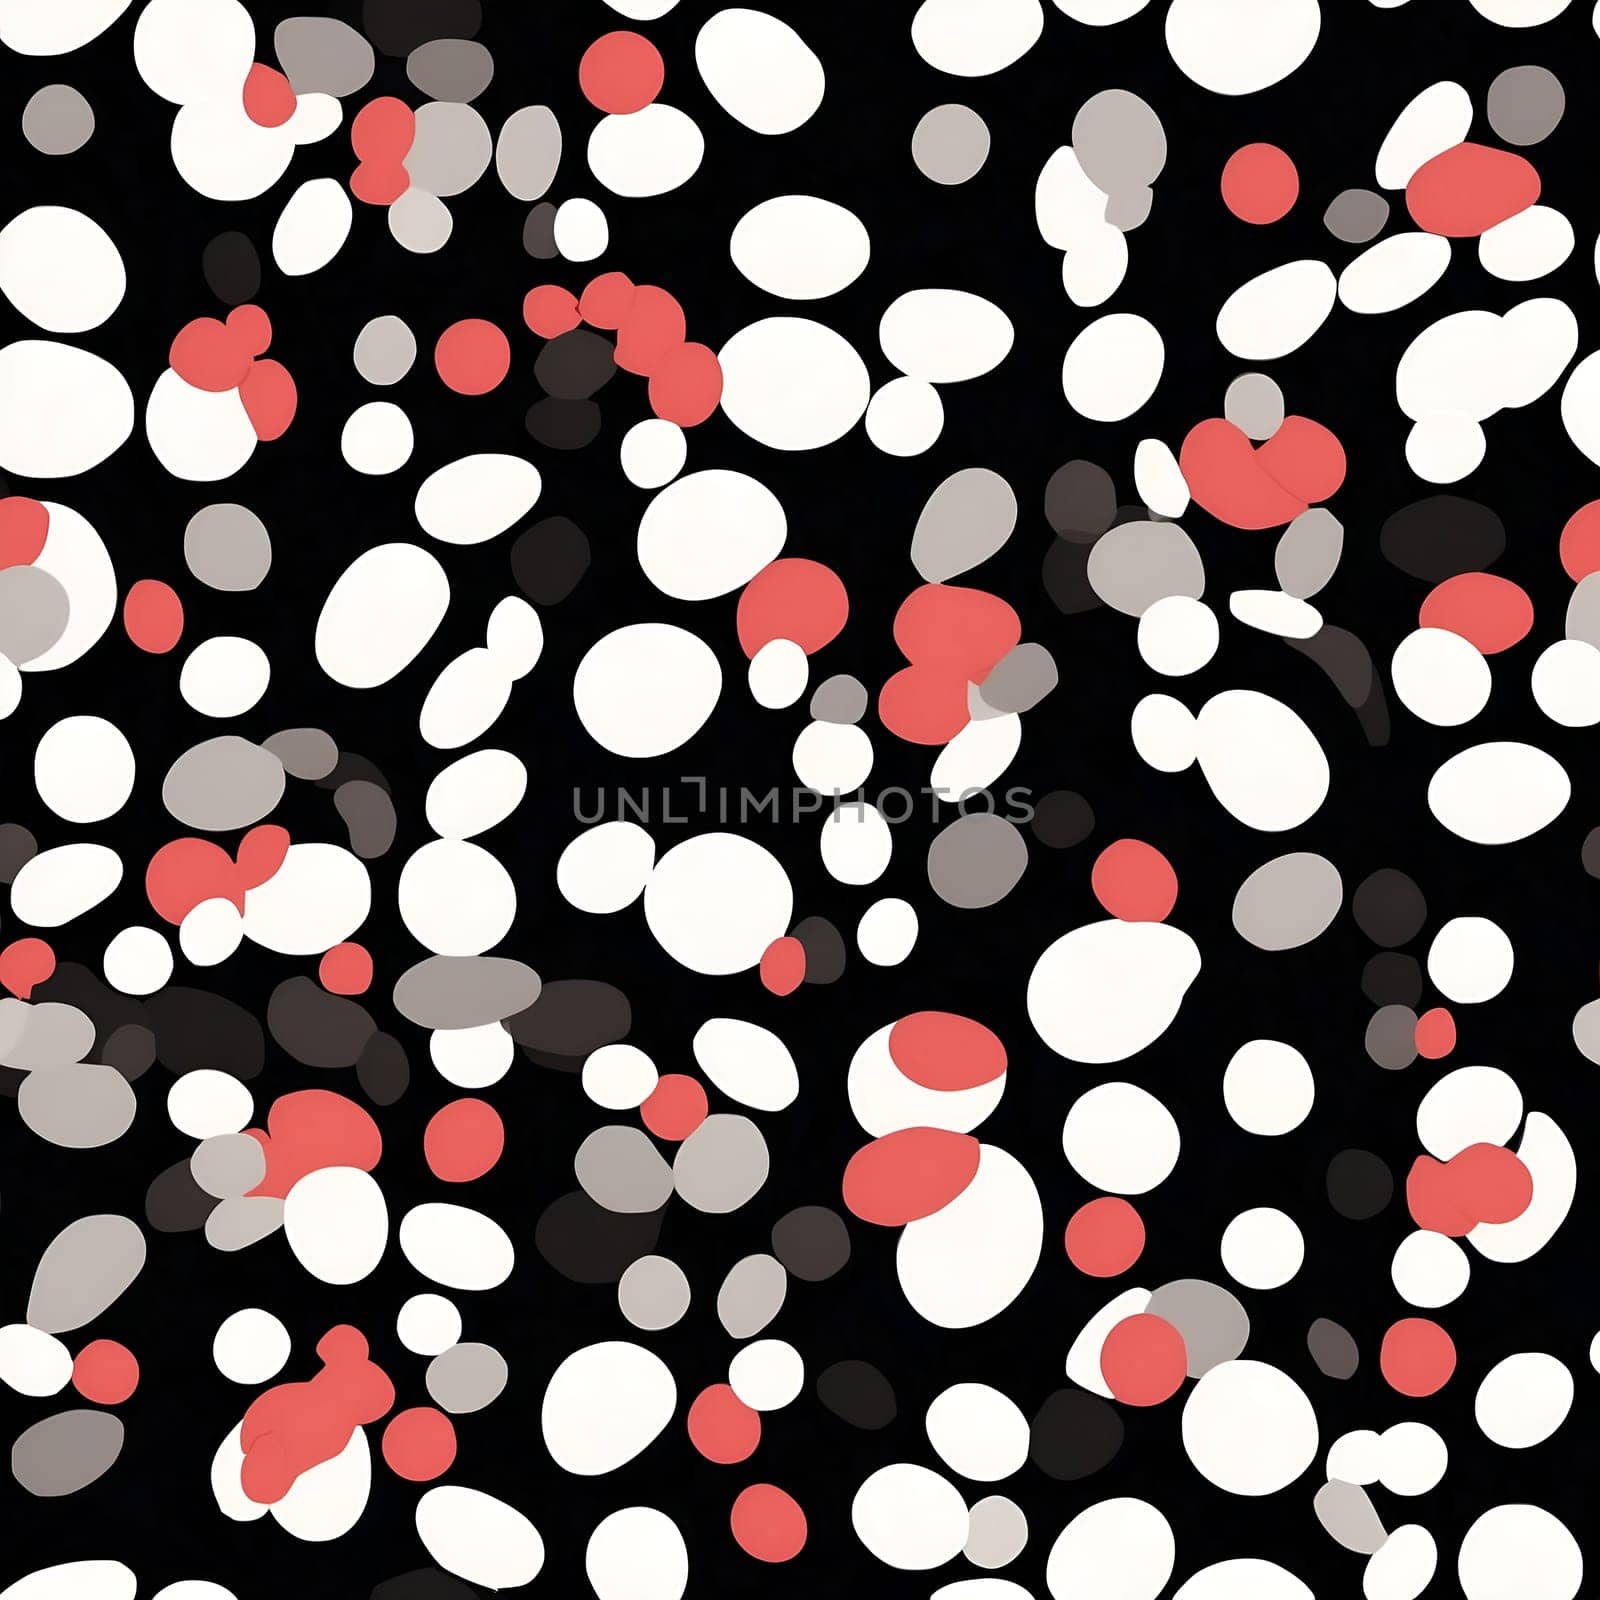 A seamless pattern featuring a black and white background with a series of red dots arranged in a repetitive design.